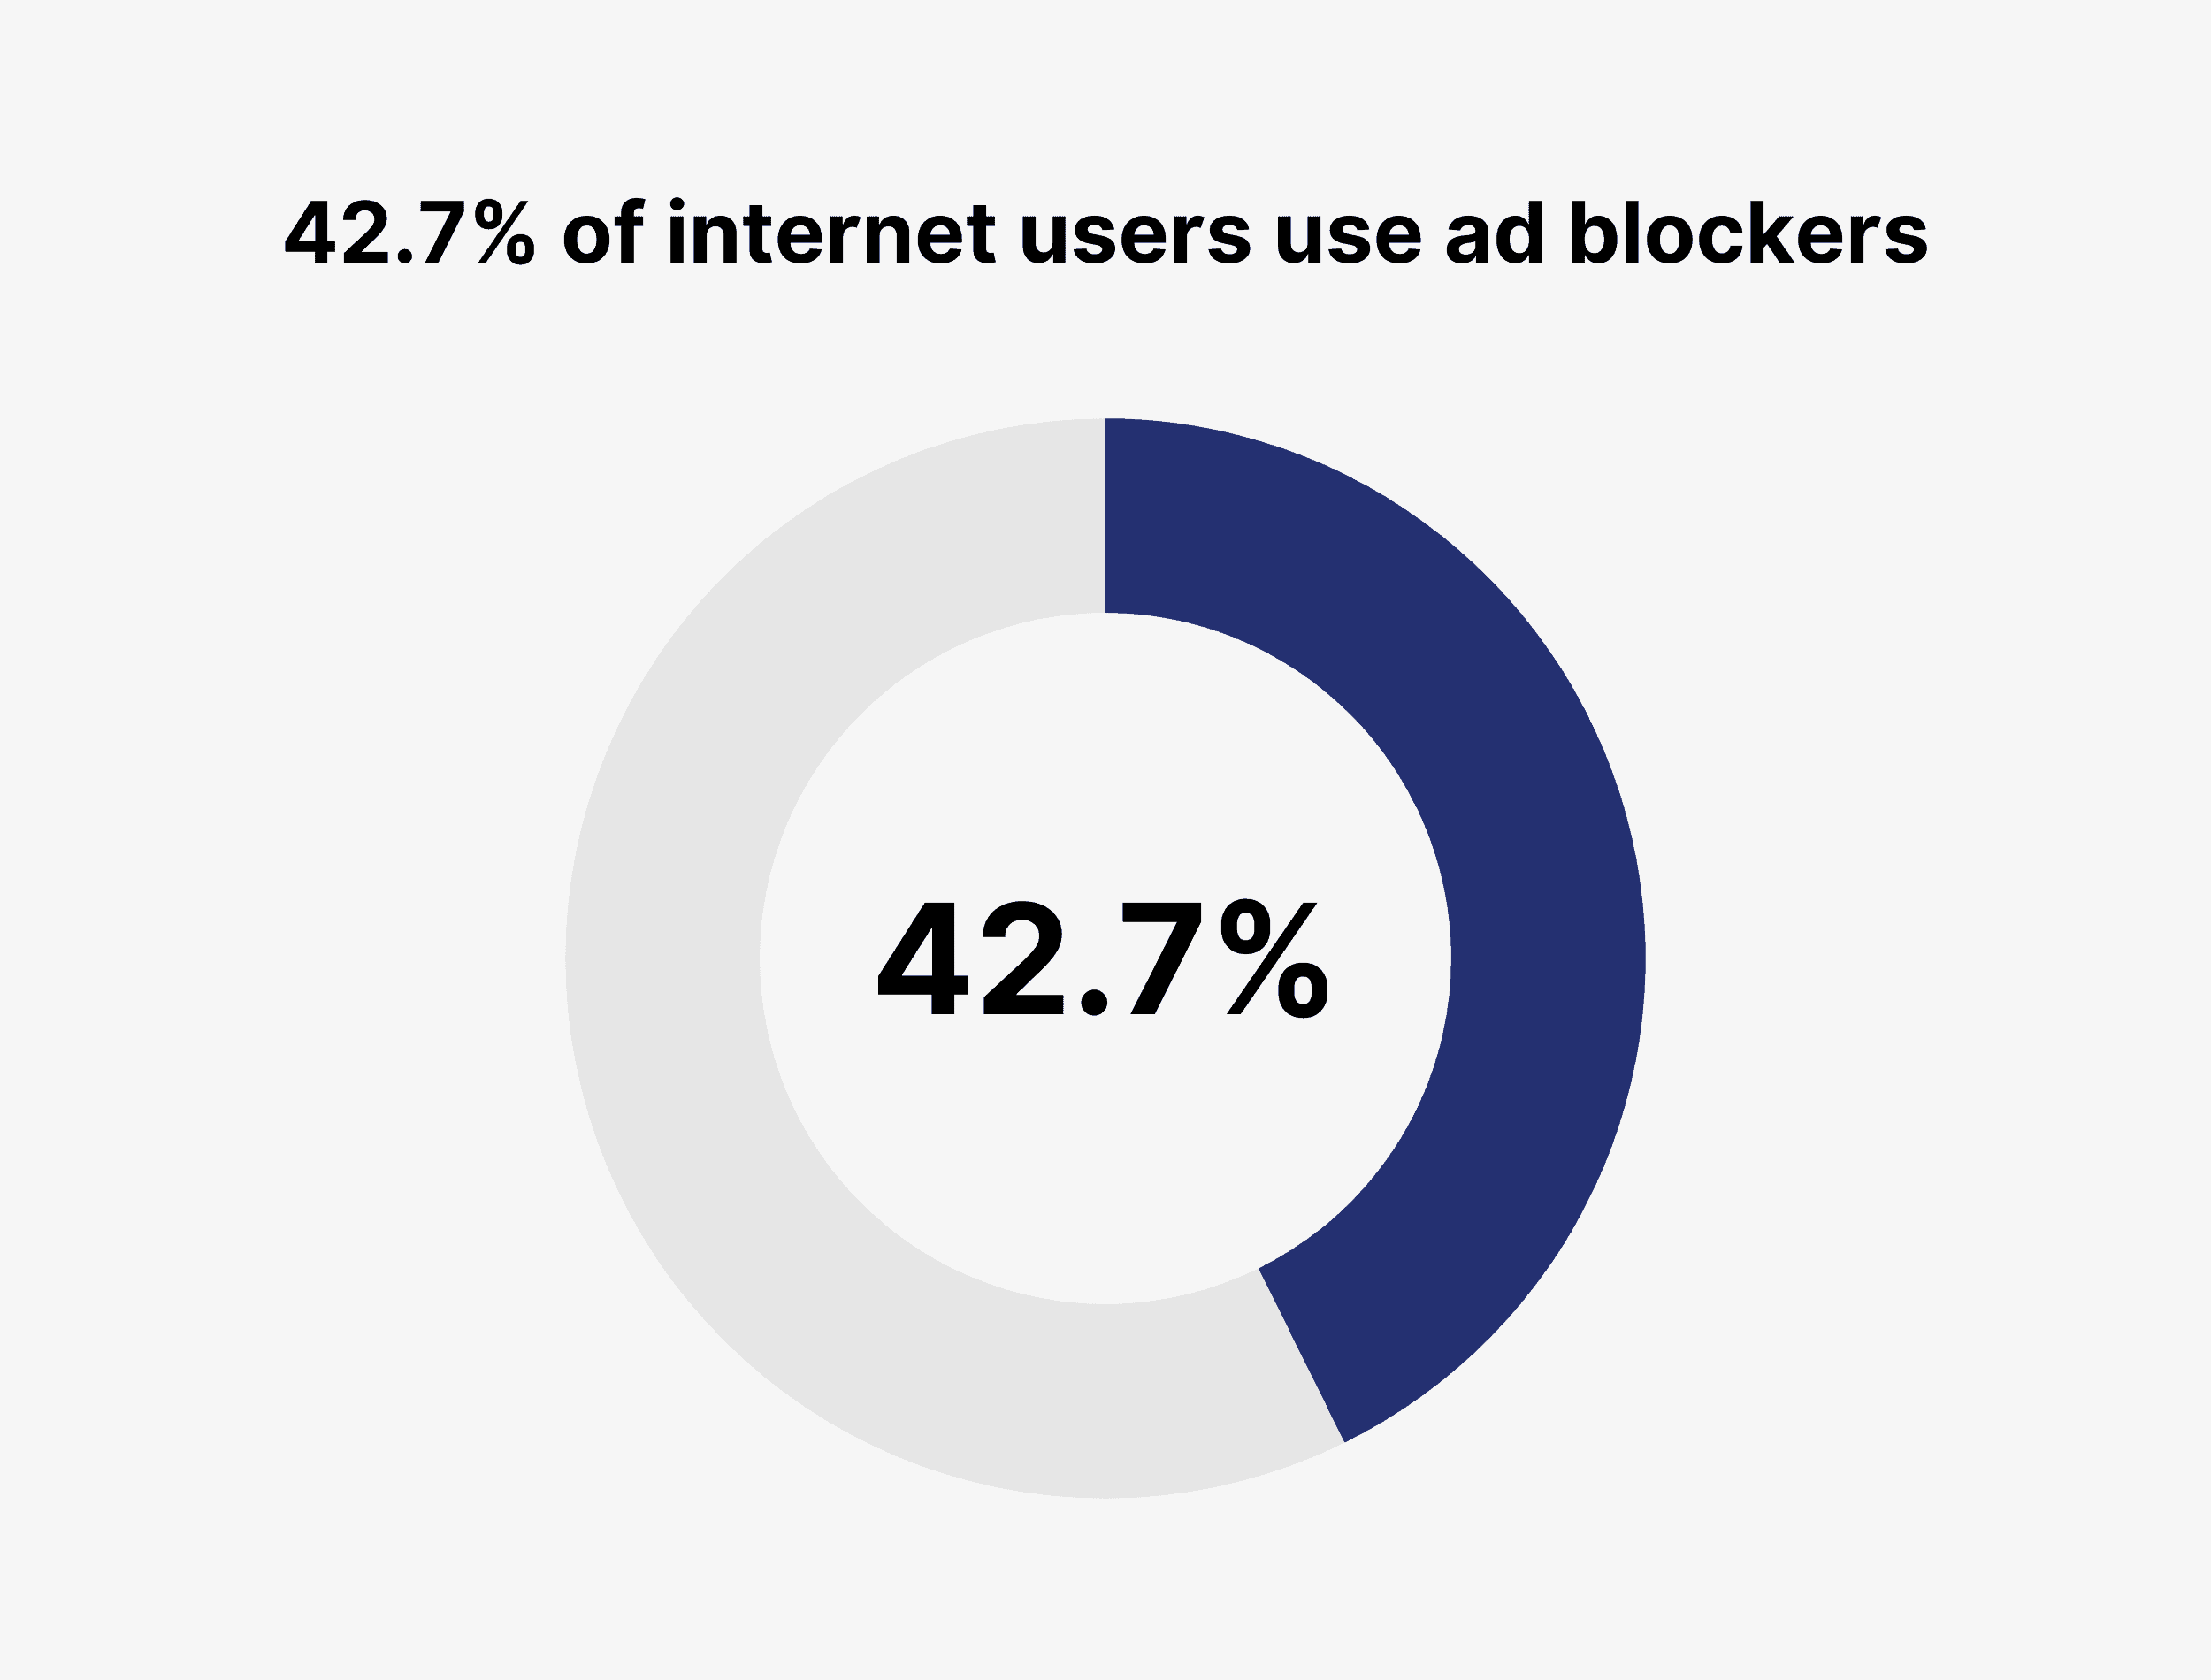 42.7% of internet users use ad blockers